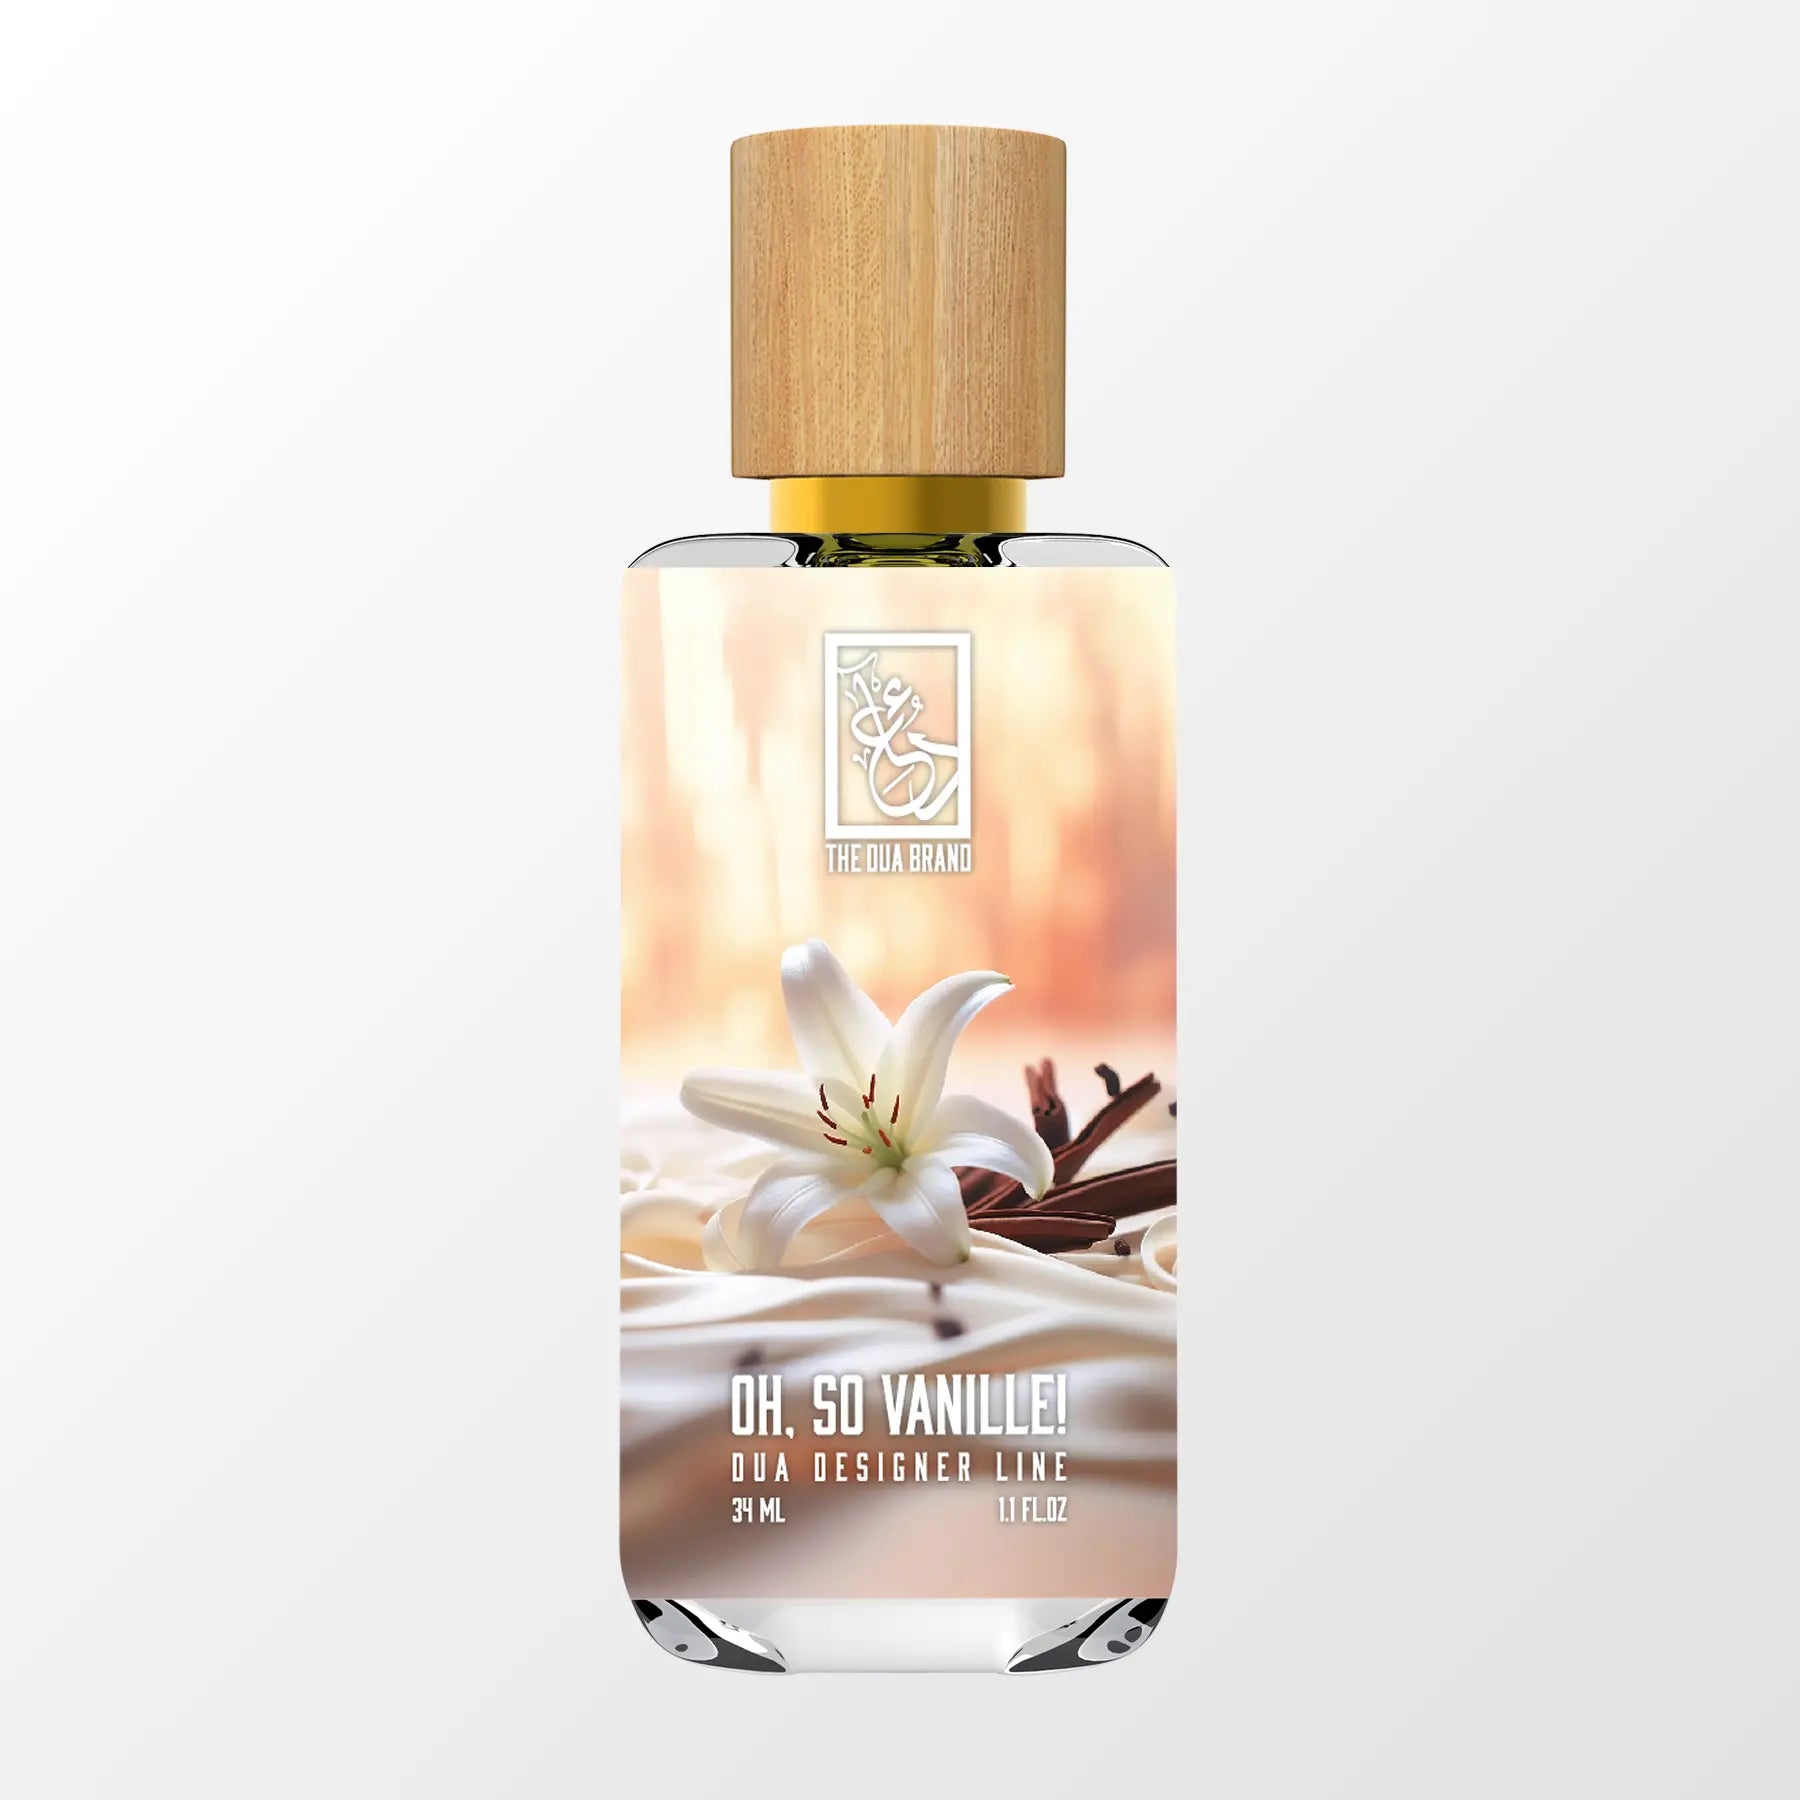 Thé Vanille by Nette » Reviews & Perfume Facts